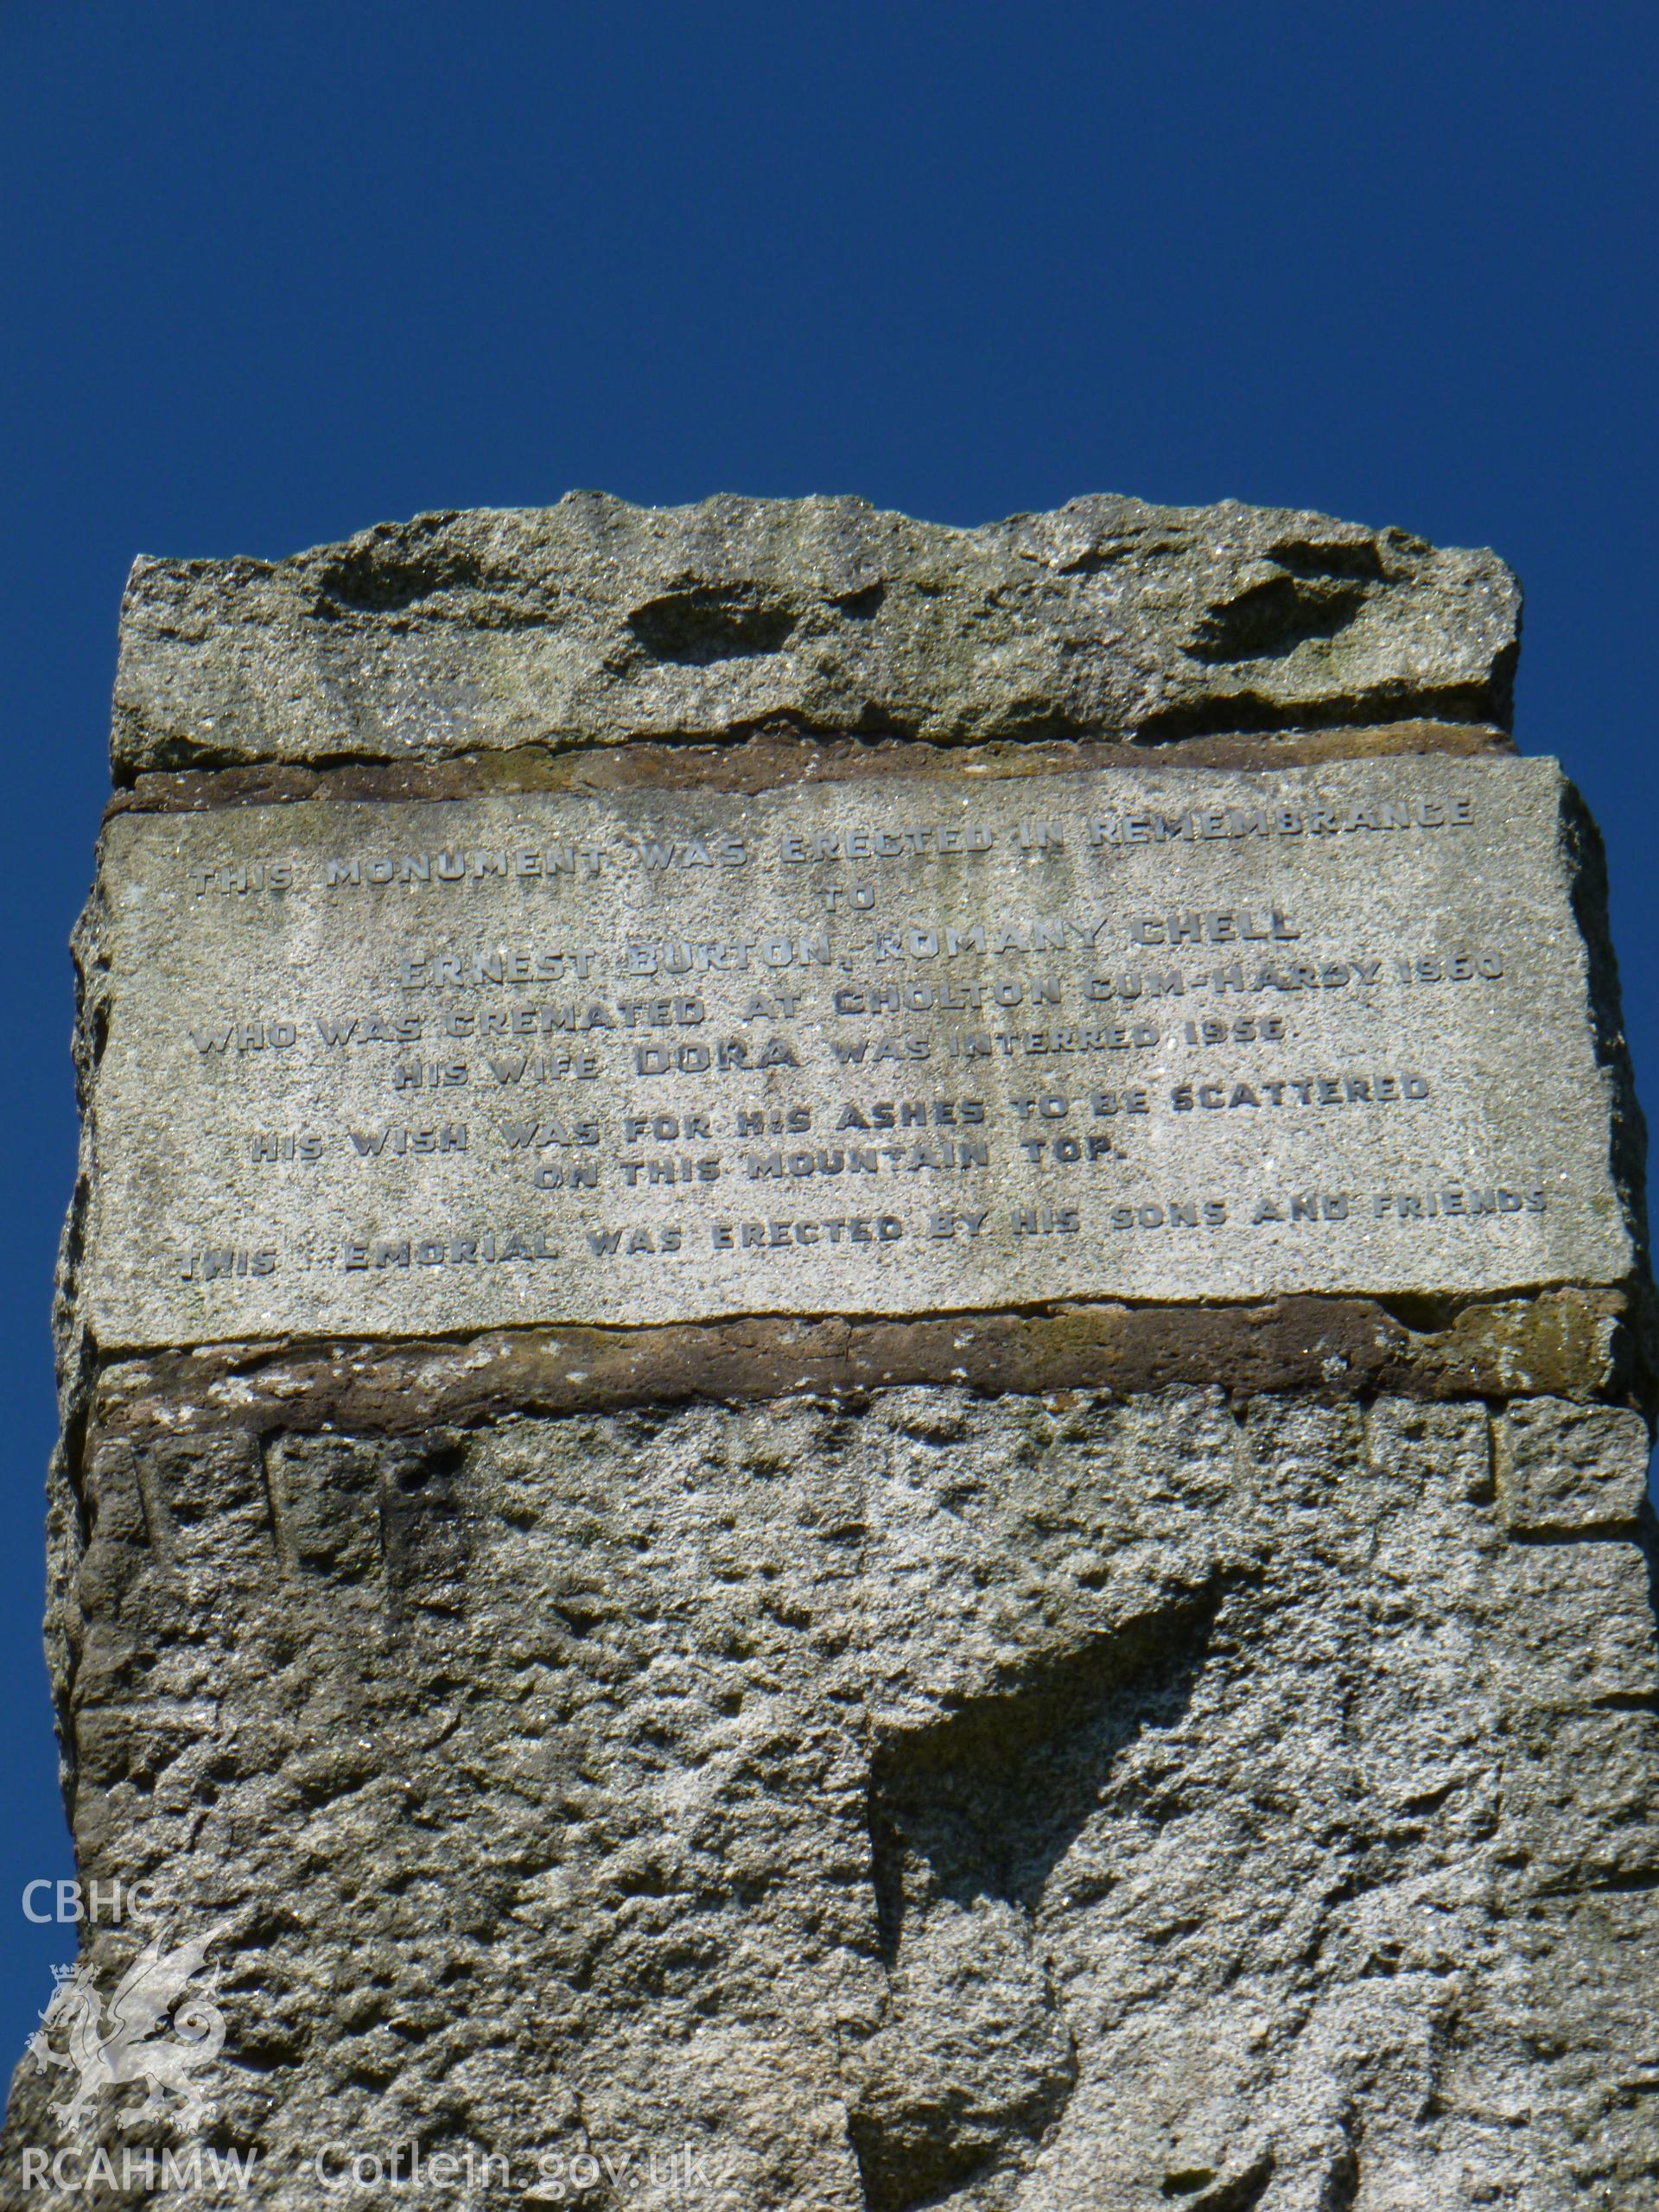 Photograph of the Romany monument showing the inscription to Ernest Burton, Romany Chell, on the west side.